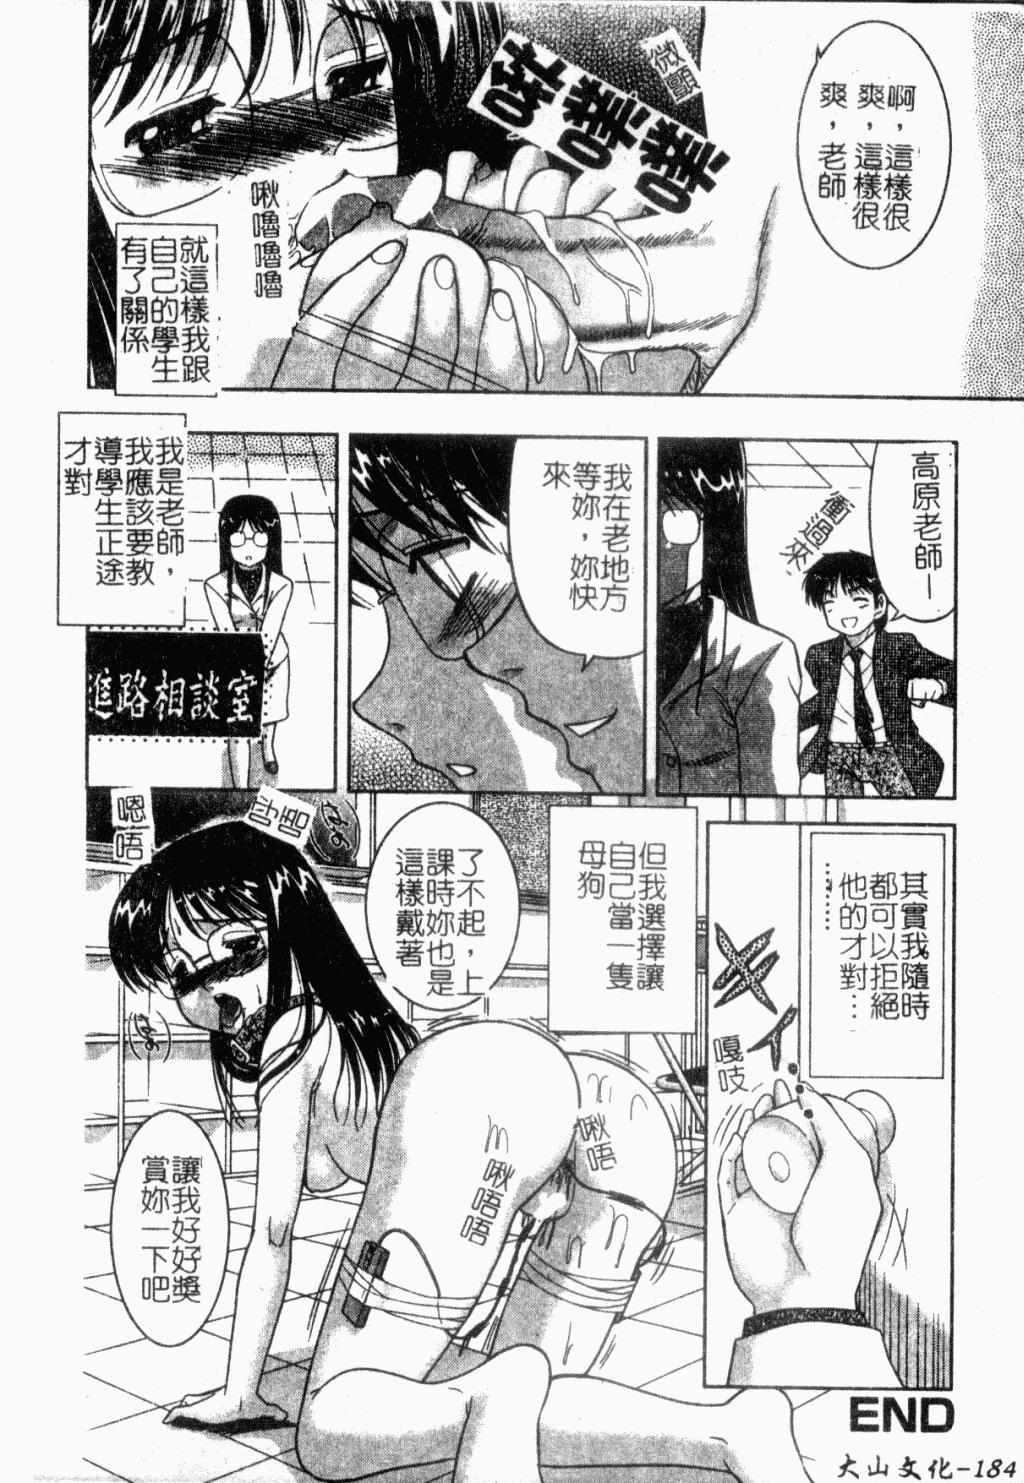 Family Sex Rinkan & Rankou Excellent | 輪姦&乱交 精選集 Jap - Page 183